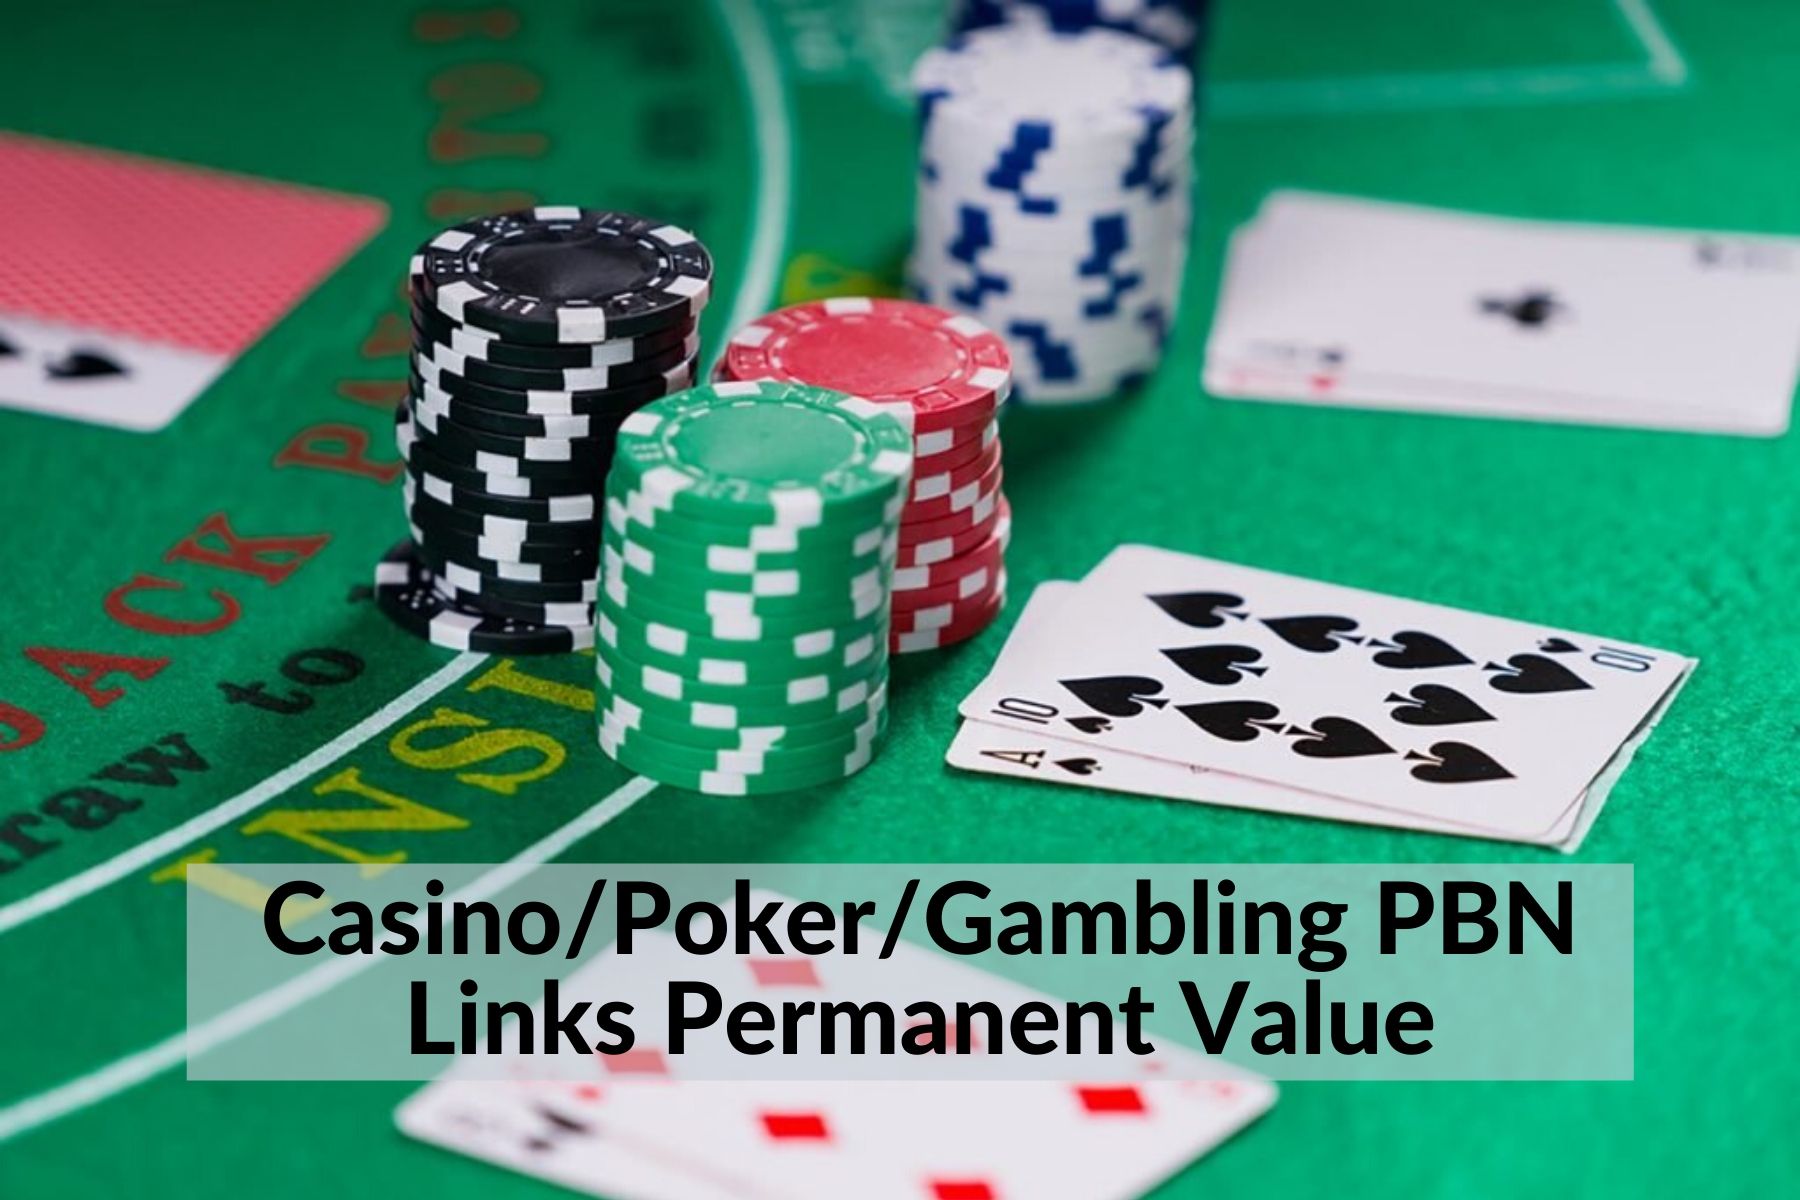 Royal Casino/Poker/Gambling PBN Links Permanent Value and 2nd tier Support backlink your website